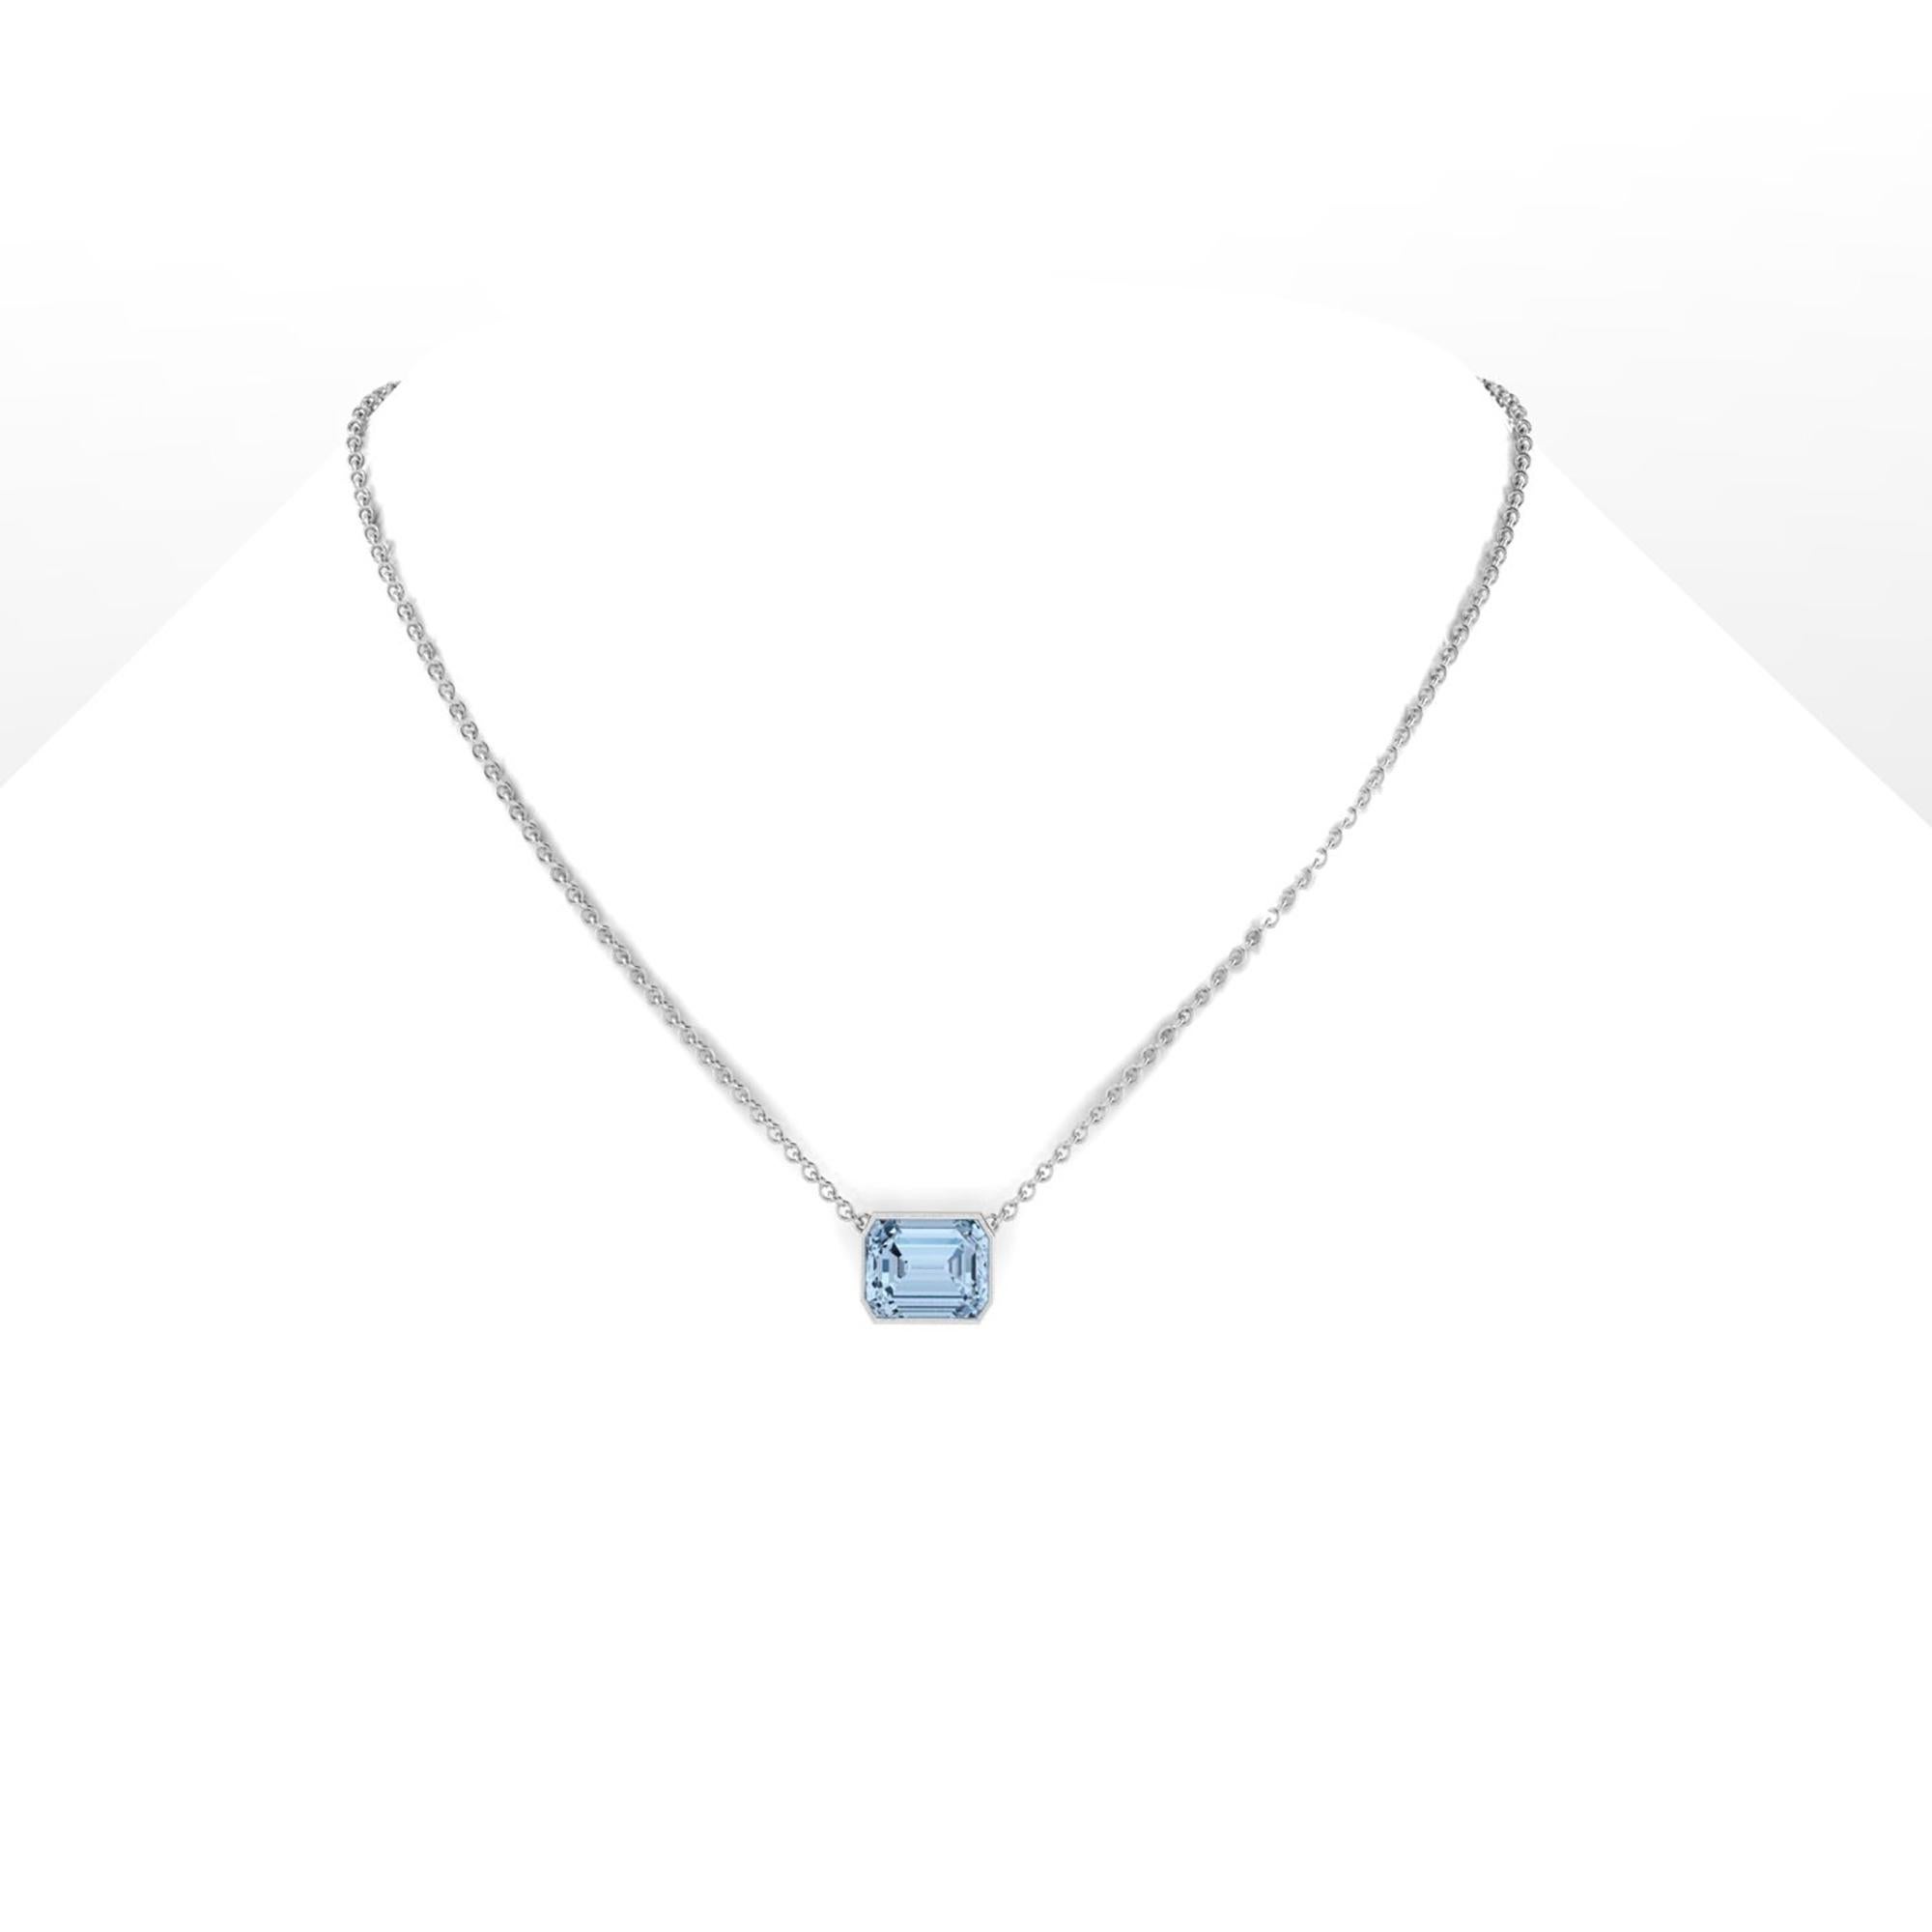 An exquisite 4.61 carat Aquamarine, emerald cut, very high quality color, eye clean gem, set in a made to perfection Platinum 950 bezel necklace
The necklace length can be adjusted at 18